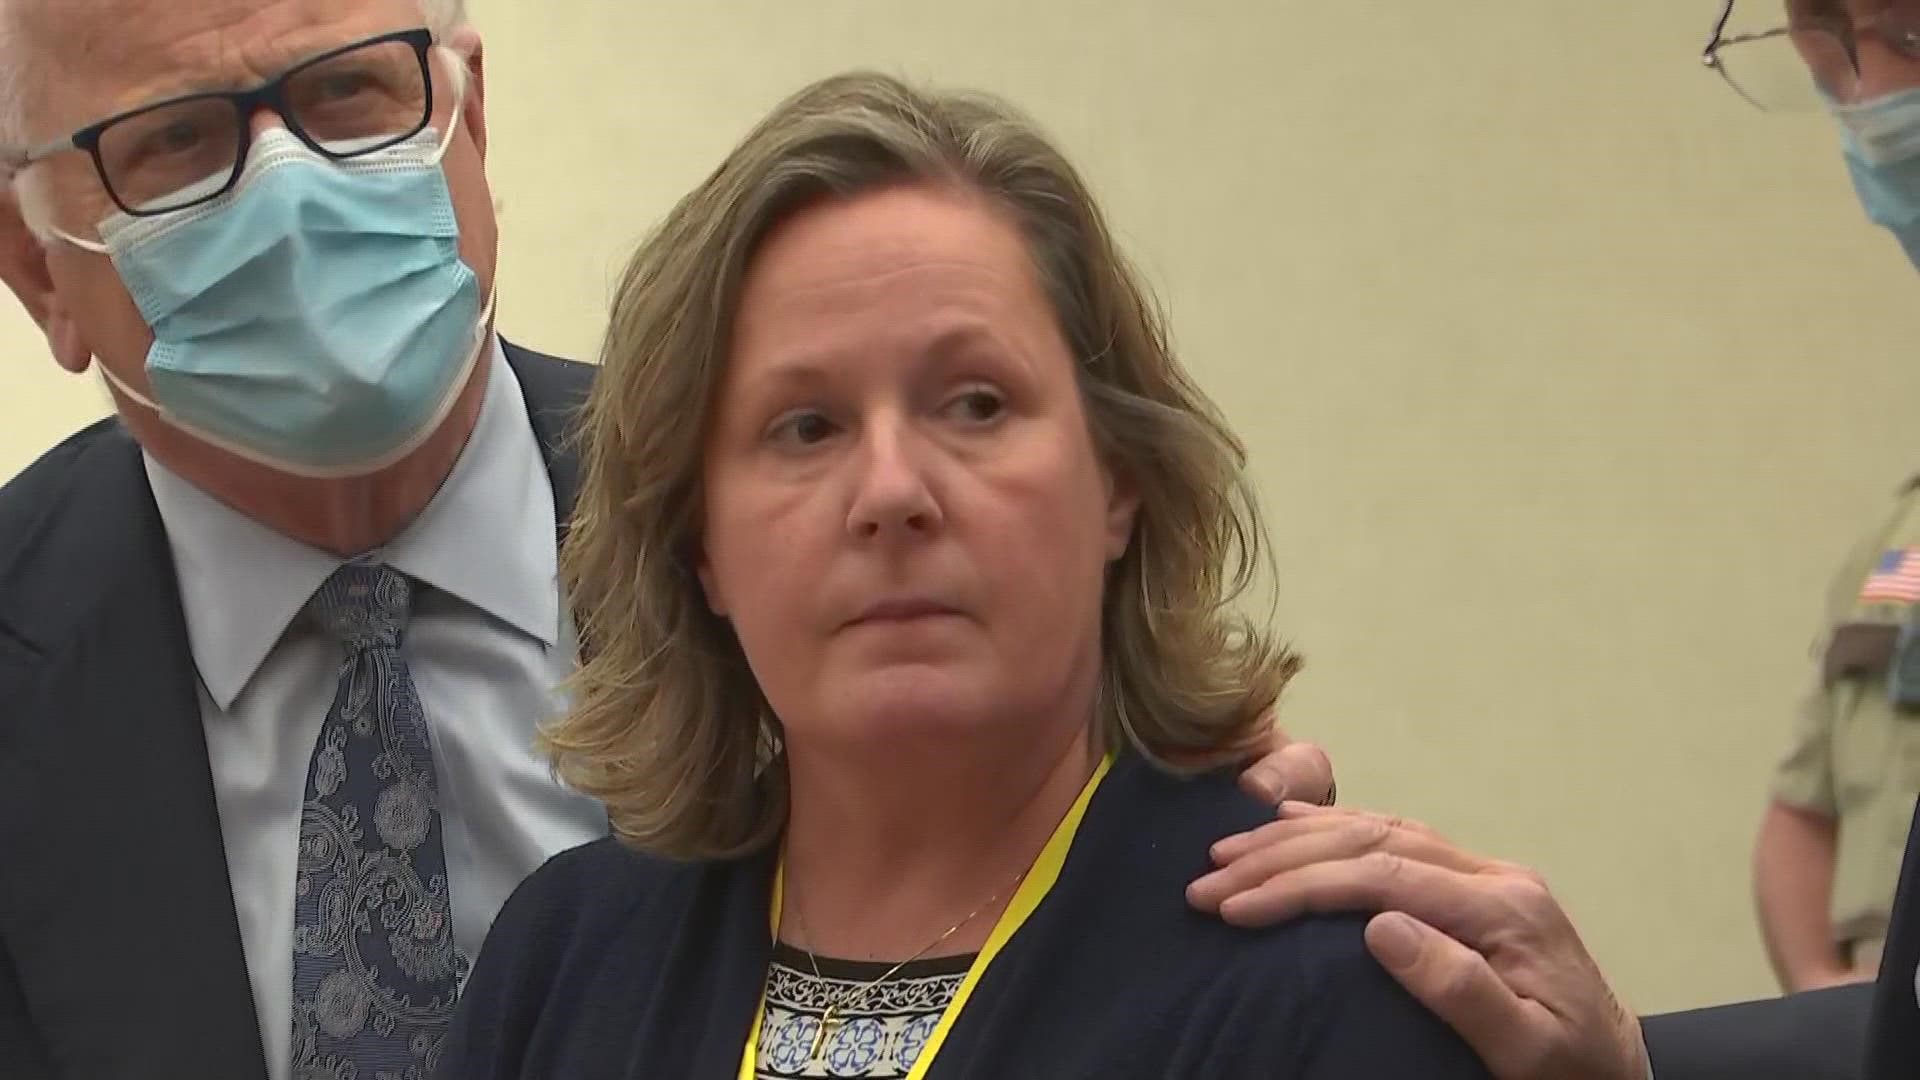 Kim Potter has been found guilty of first-degree manslaughter and second-degree manslaughter in the fatal shooting of Daunte Wright.